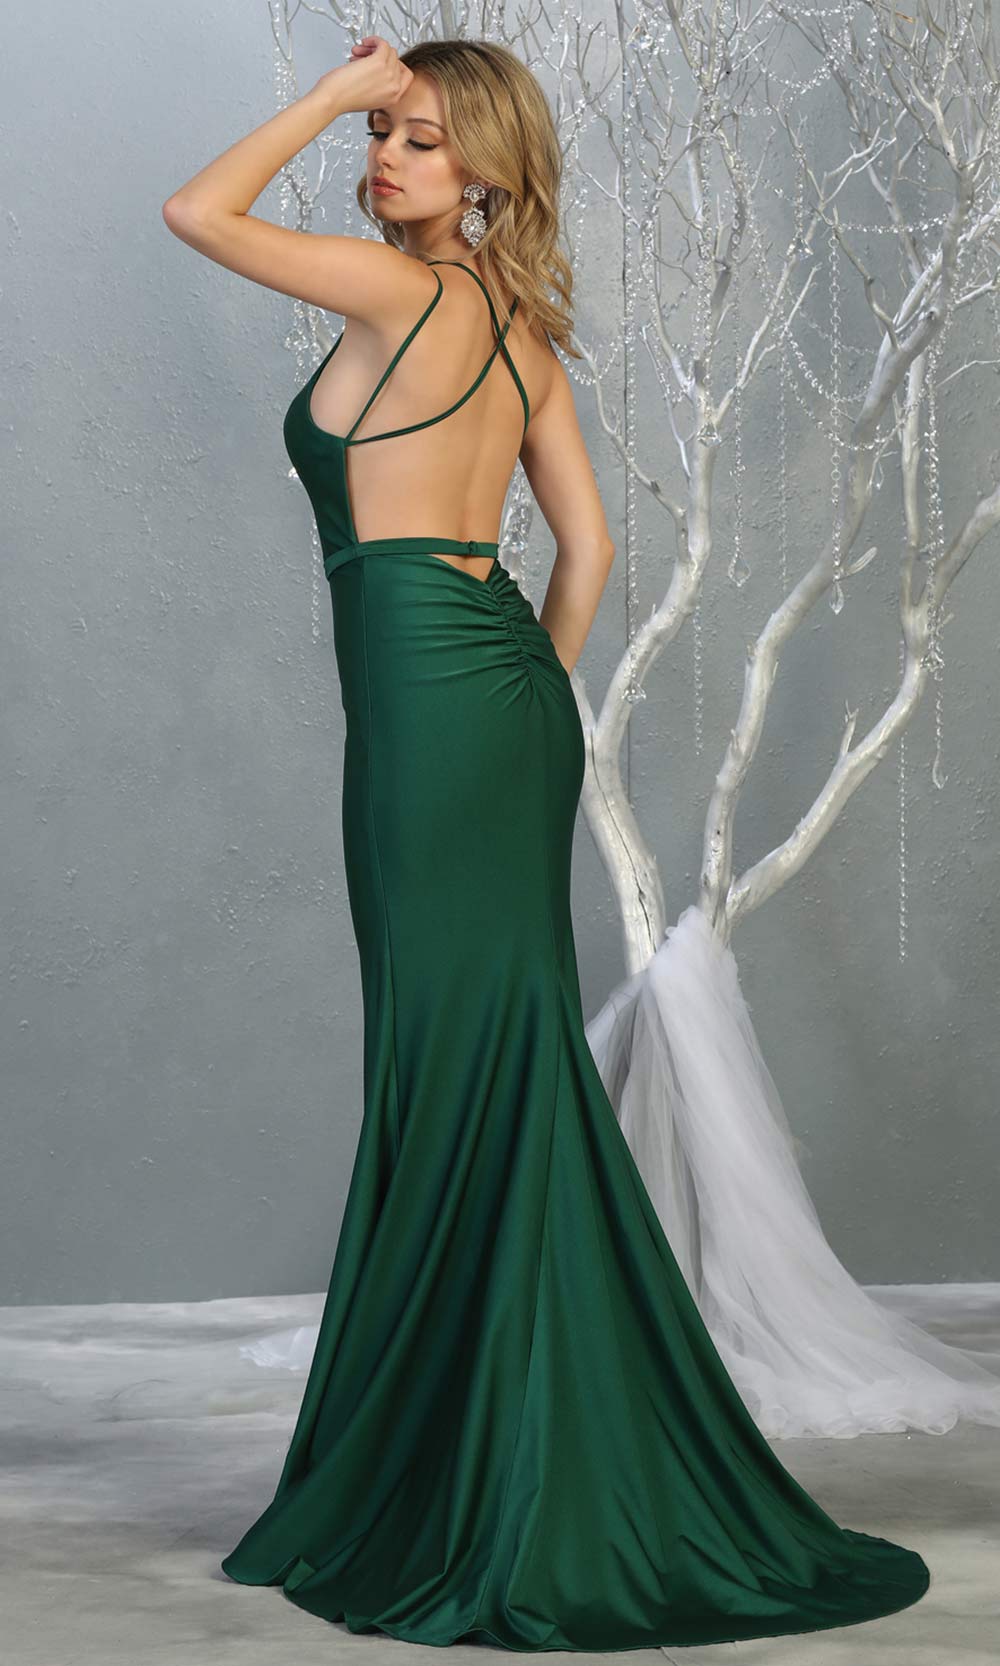 Mayqueen MQ1720 long hunter green sleek & sexy evening dress w/low v neck & open back dress. This tight fitted dress is perfect for prom, sleek & sexy wedding guest dress, gala, engagement/e-shoot dress, bridesmaid dresses,formal evening party dress-b.jpg